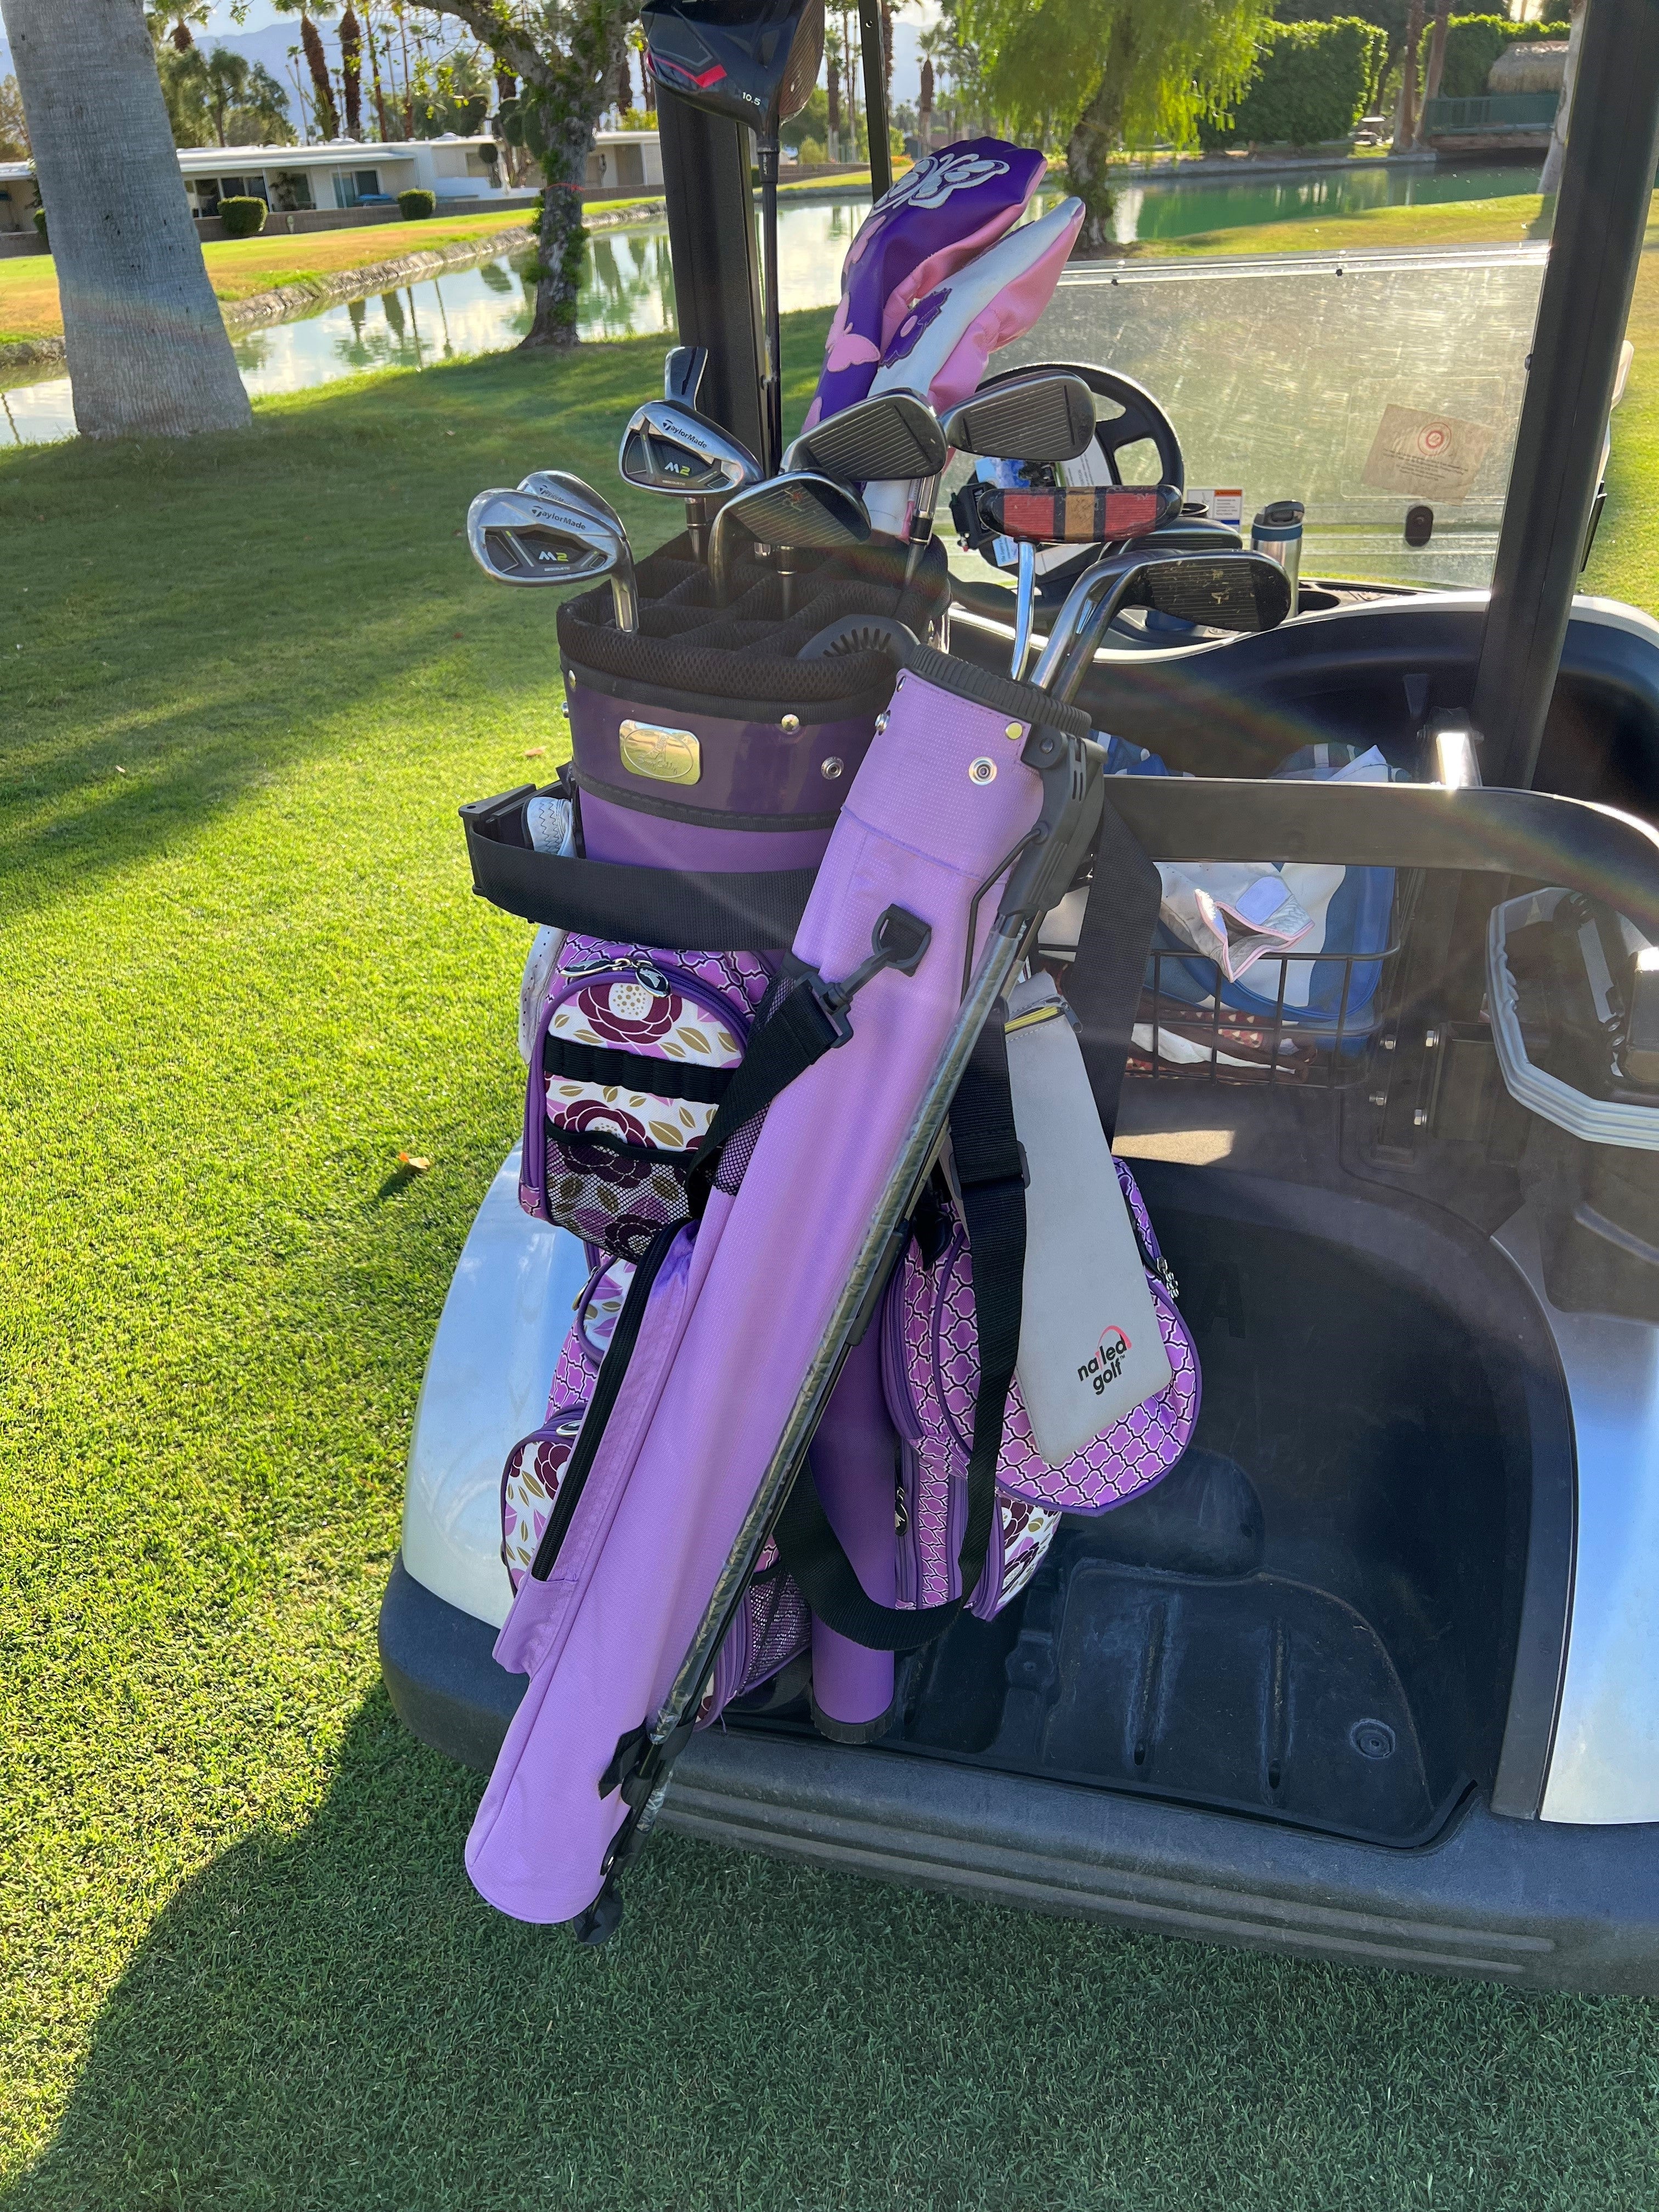 The Sunday Bag Advantage: Elevating Your Golf Experience